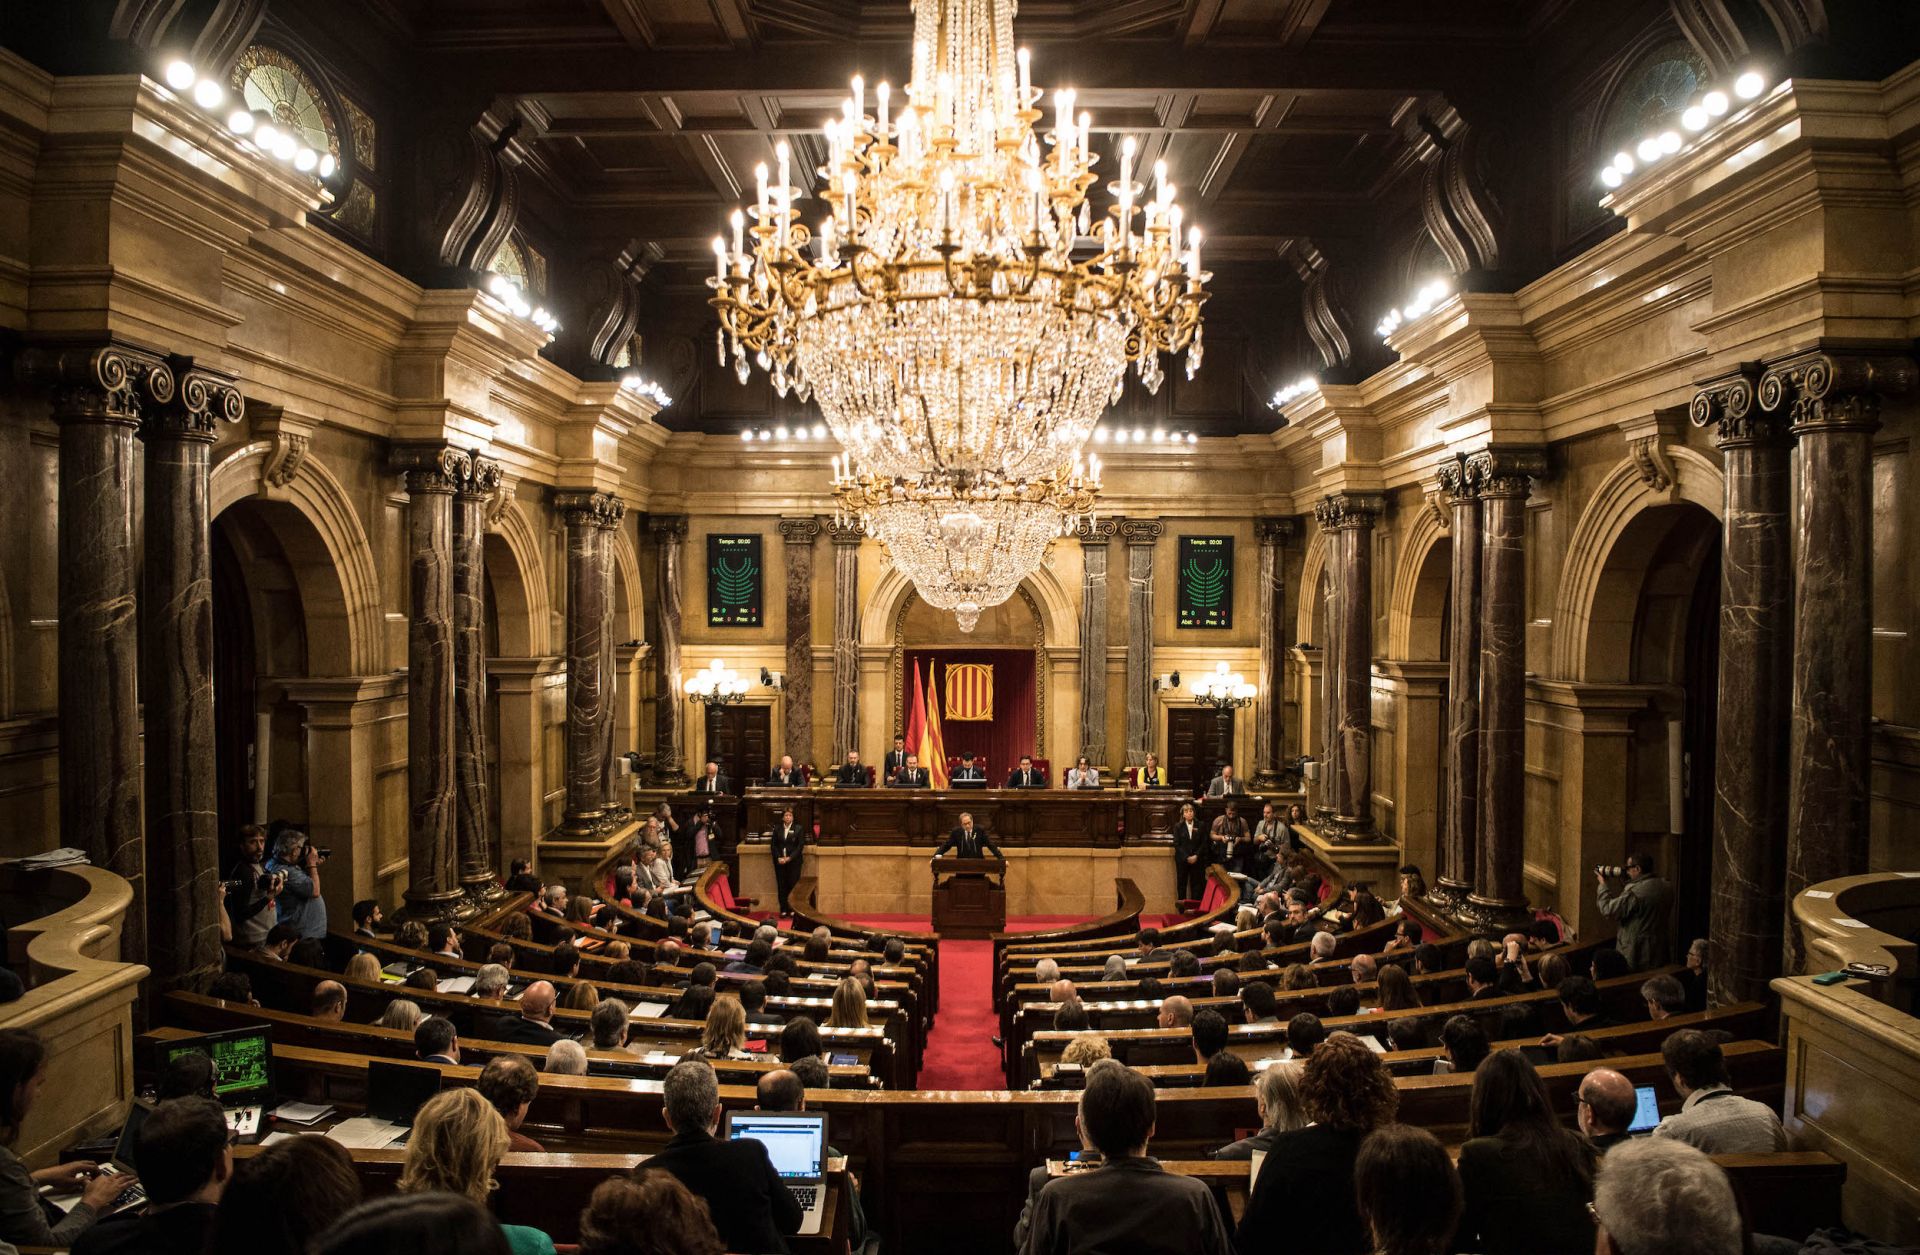 Quim Torra, a strong advocate for Catalan succession, delivers remarks to the regional parliament during his investiture as the region's president on May 14.